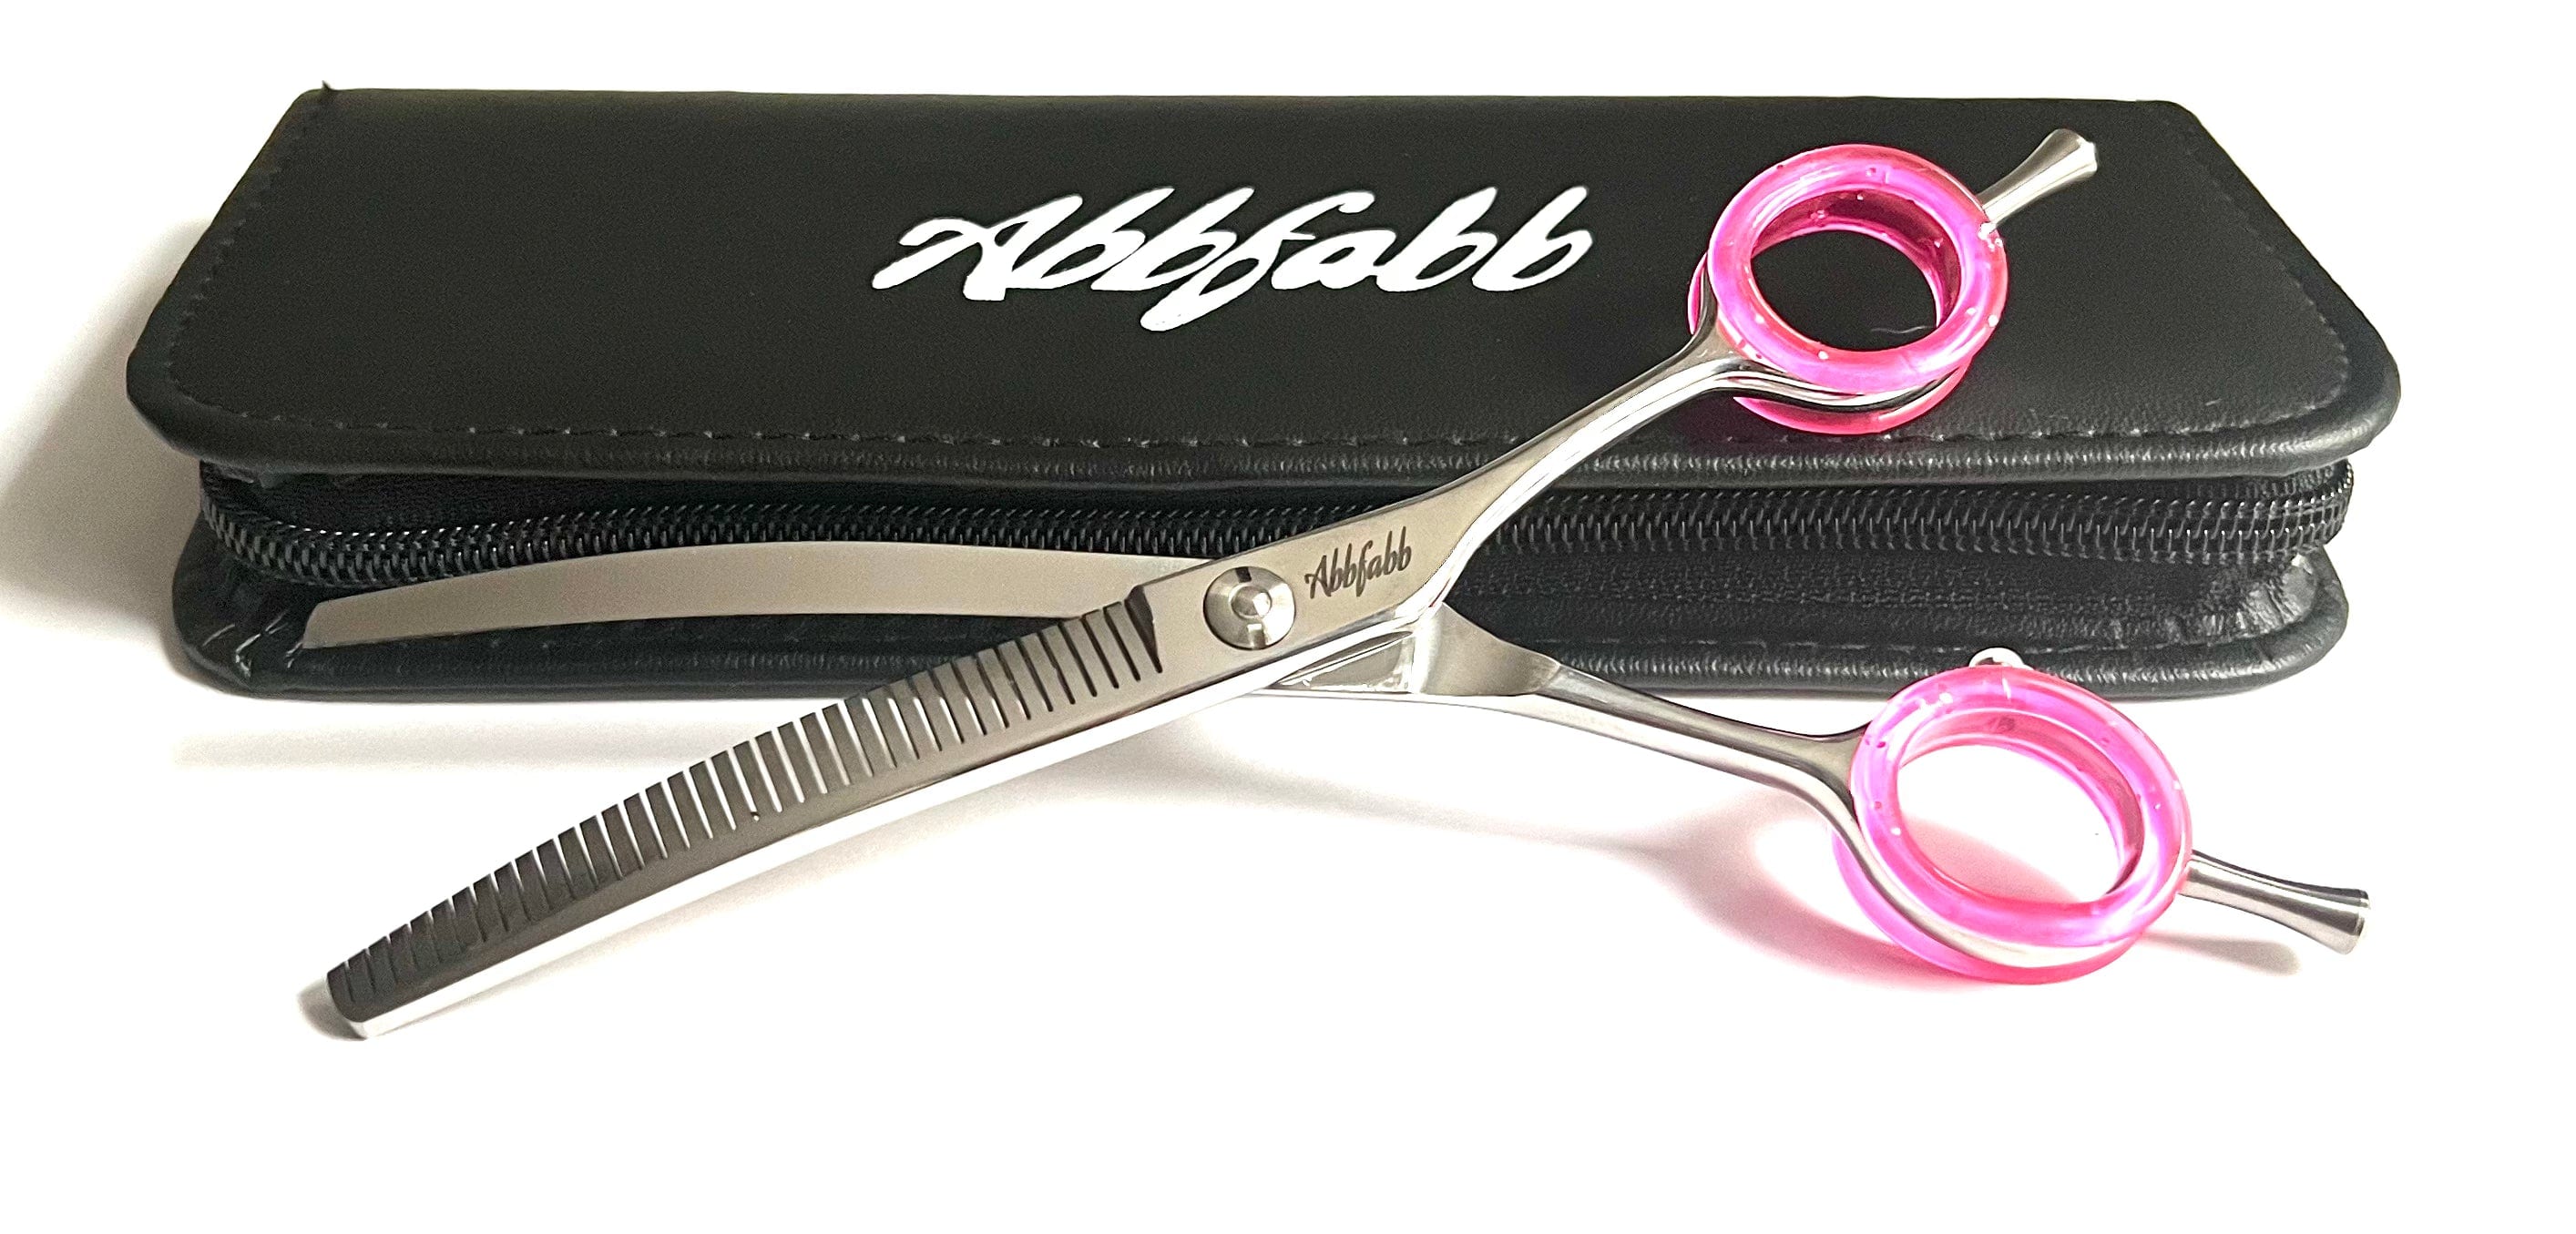 Abbfabb Grooming Scissors 6.5" Reversible Curved Thinning Dog Grooming Scissor. Flippable Curved Fluffer. Curved grooming shear